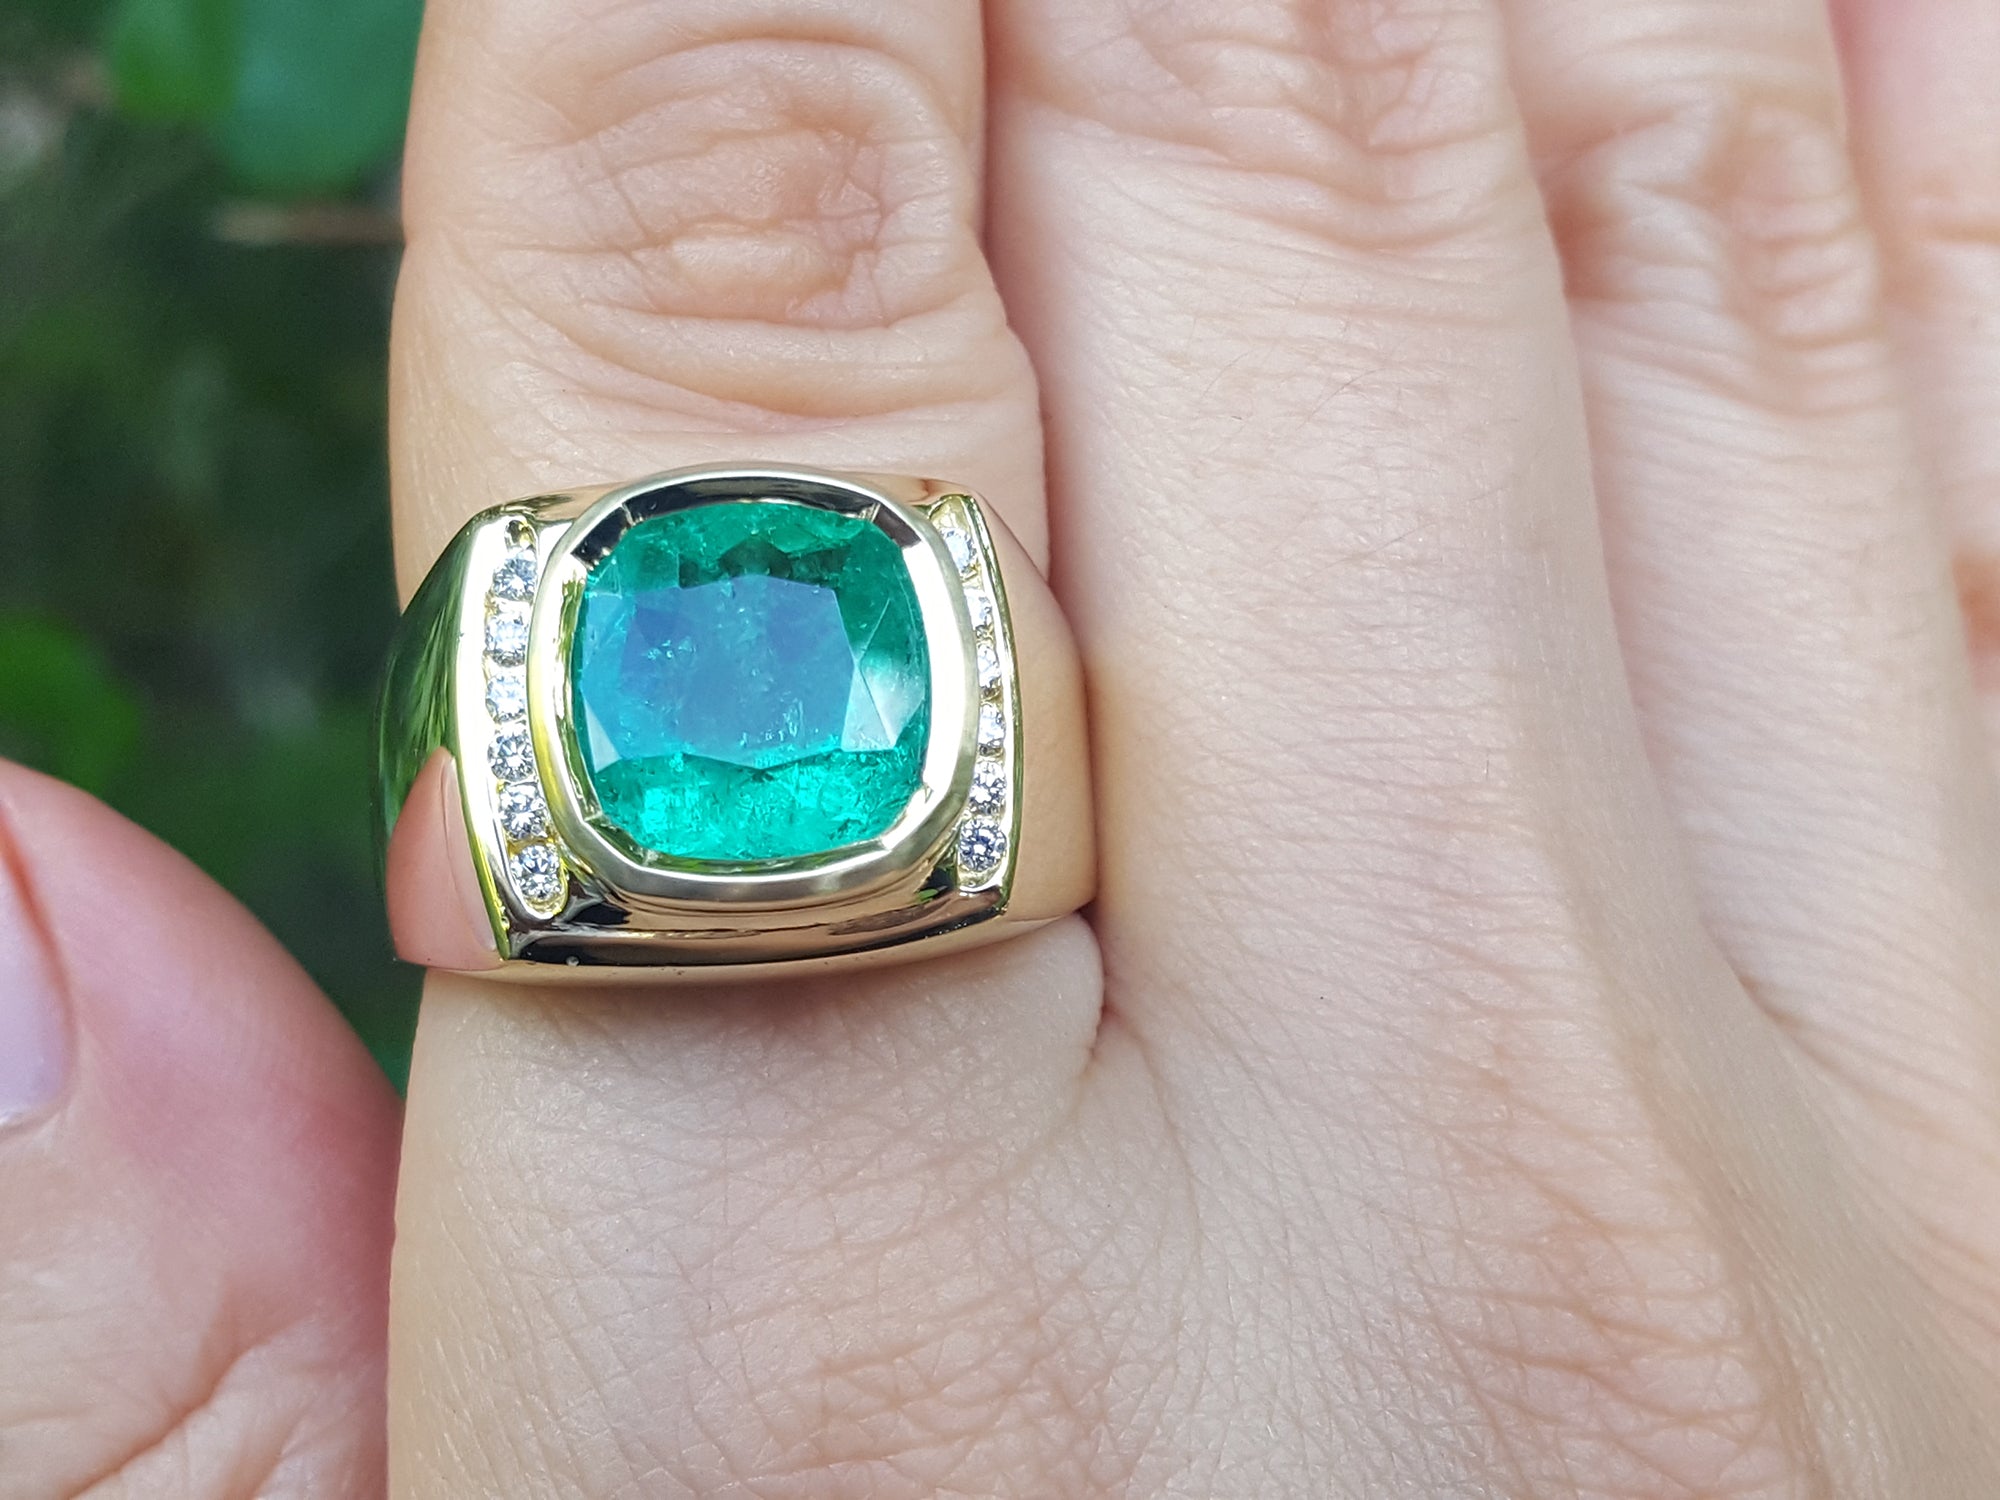 Men’s gold ring with emerald